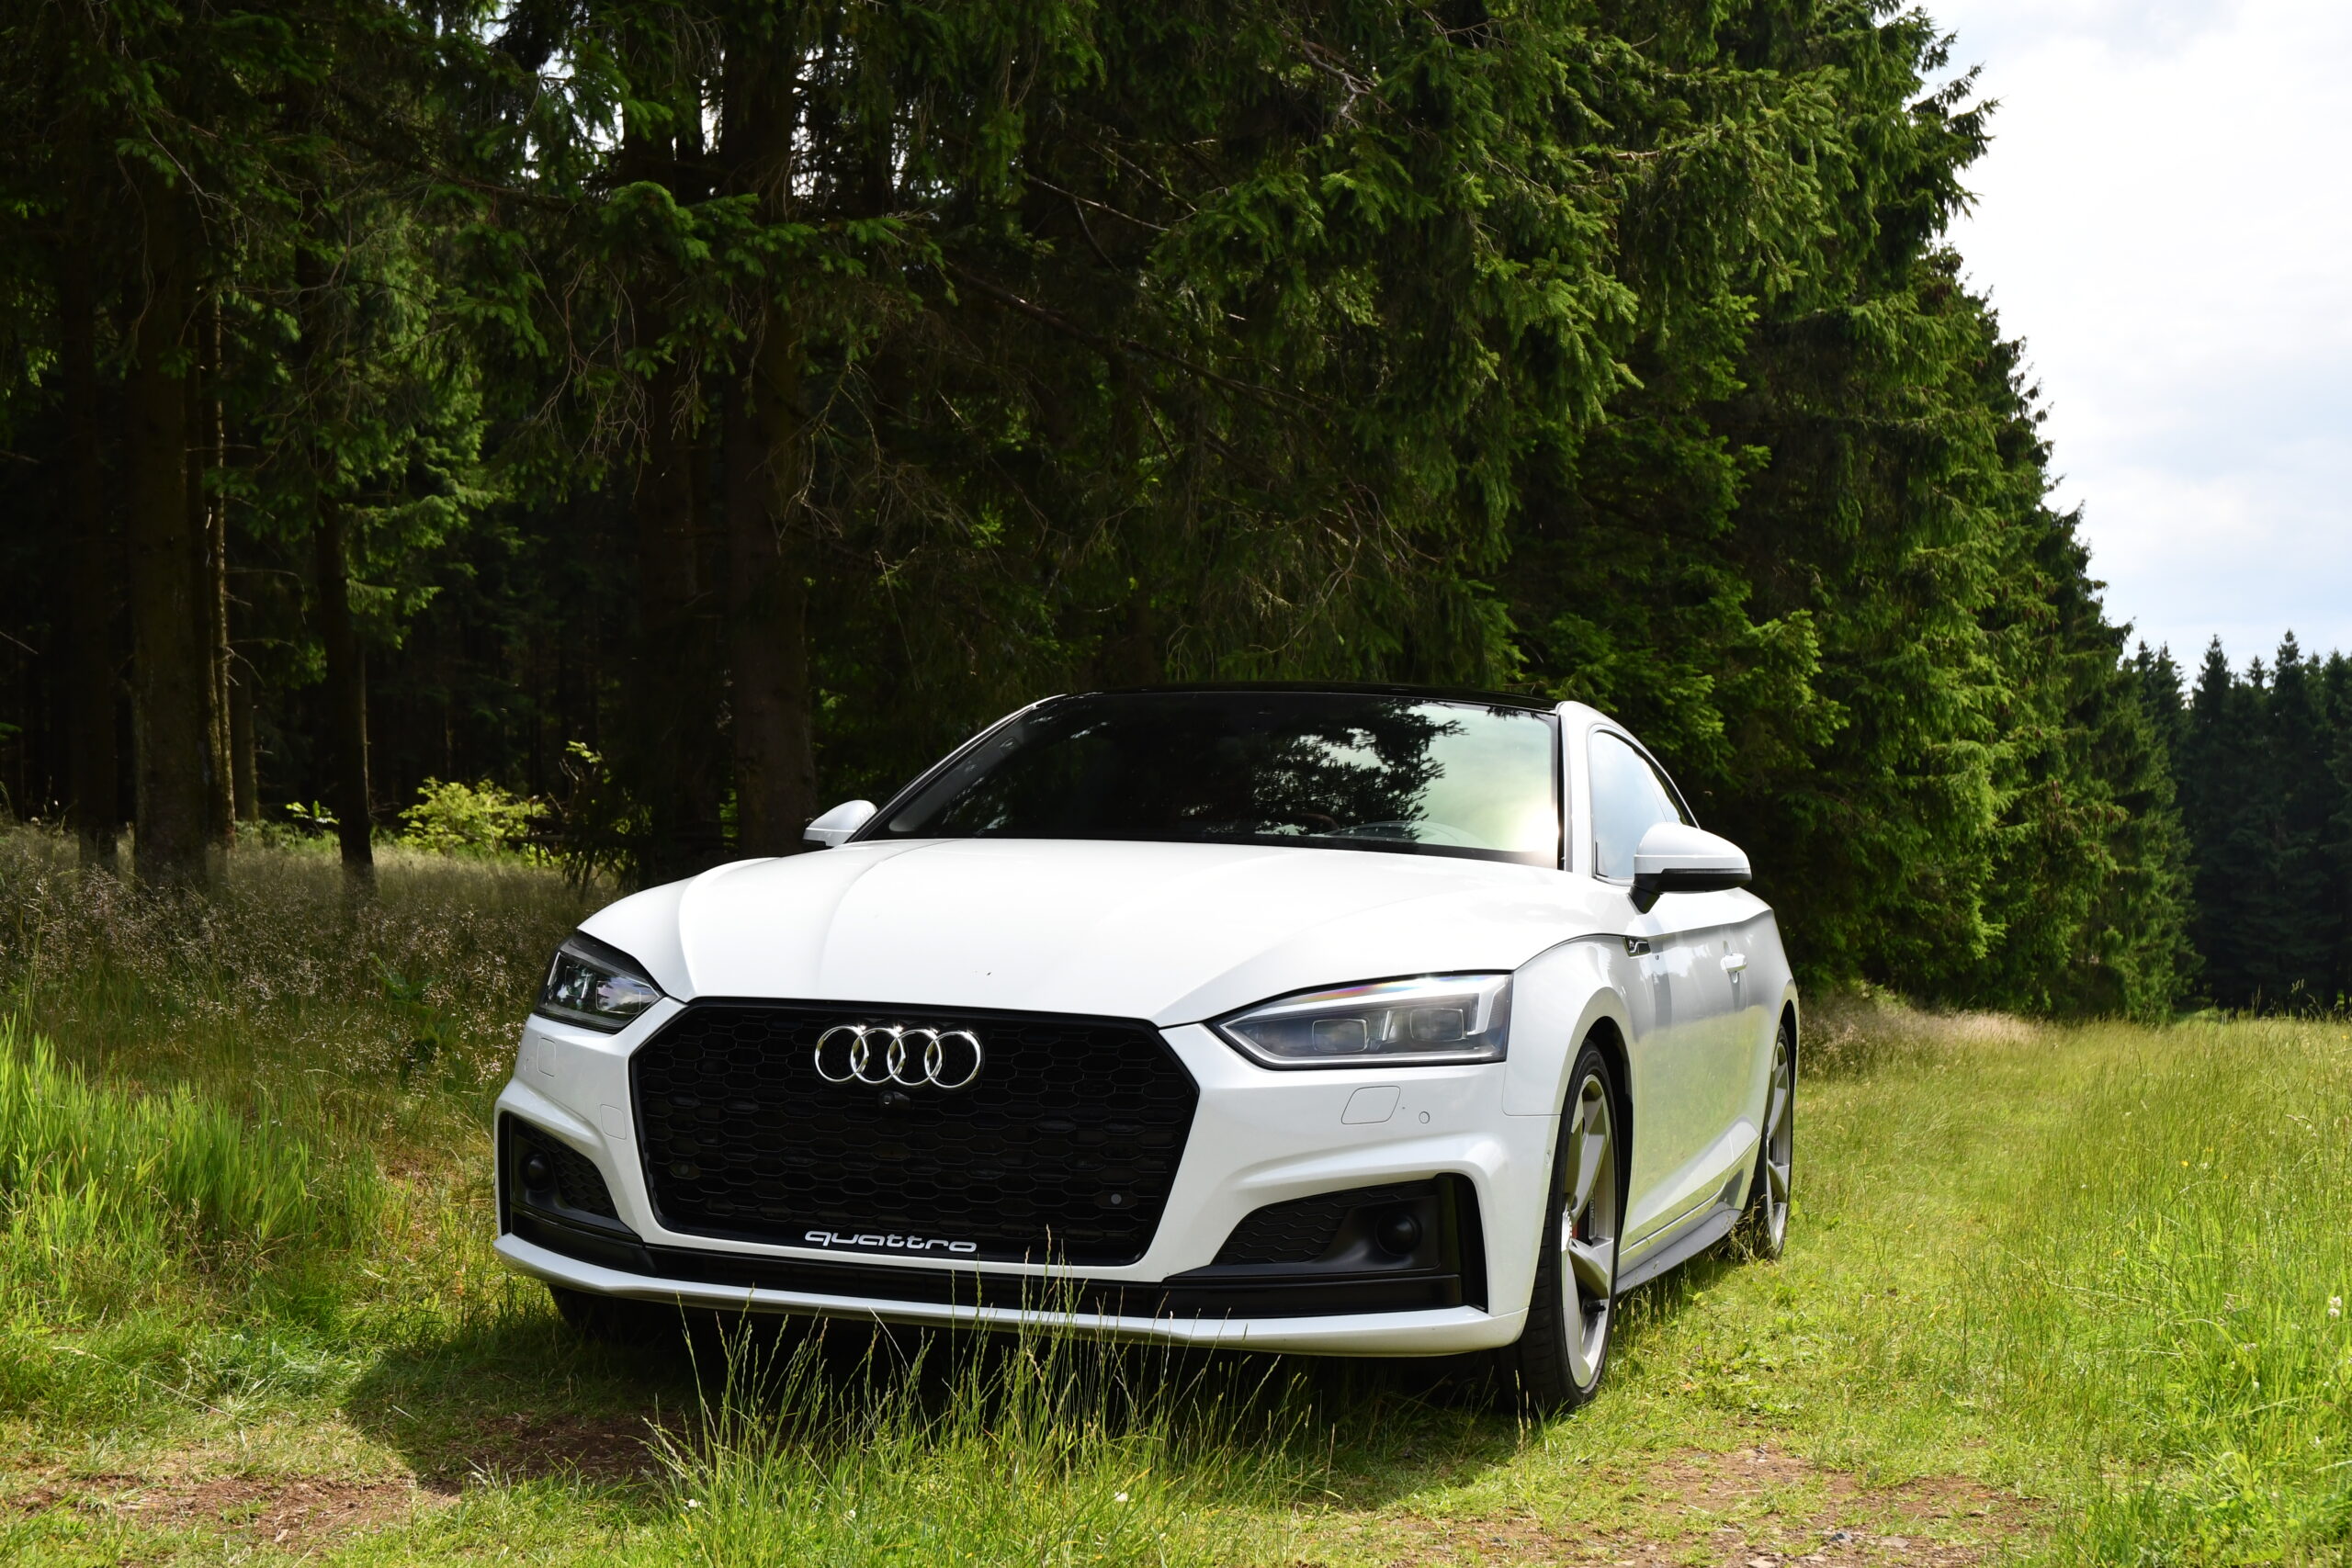 Audi S5 Coupe near the forest